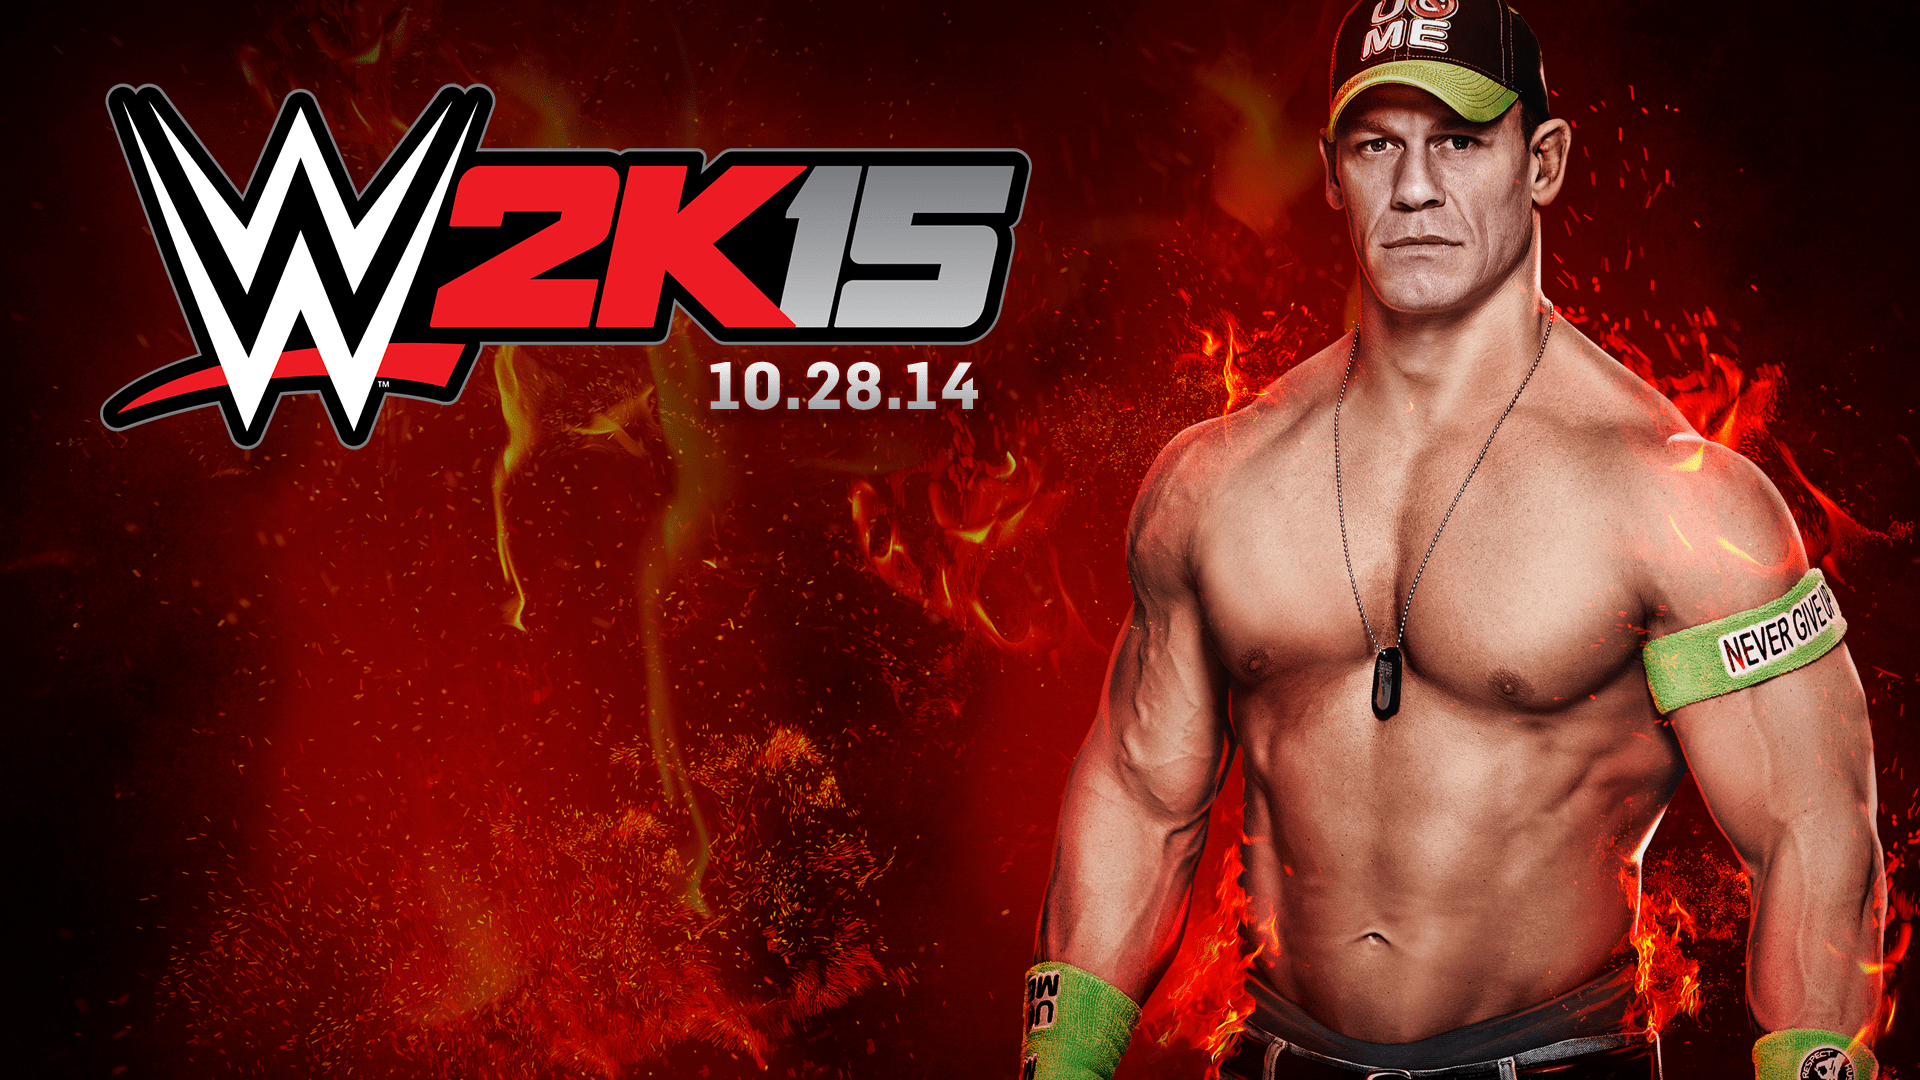 Wallpapers Wwe 2k15 Images